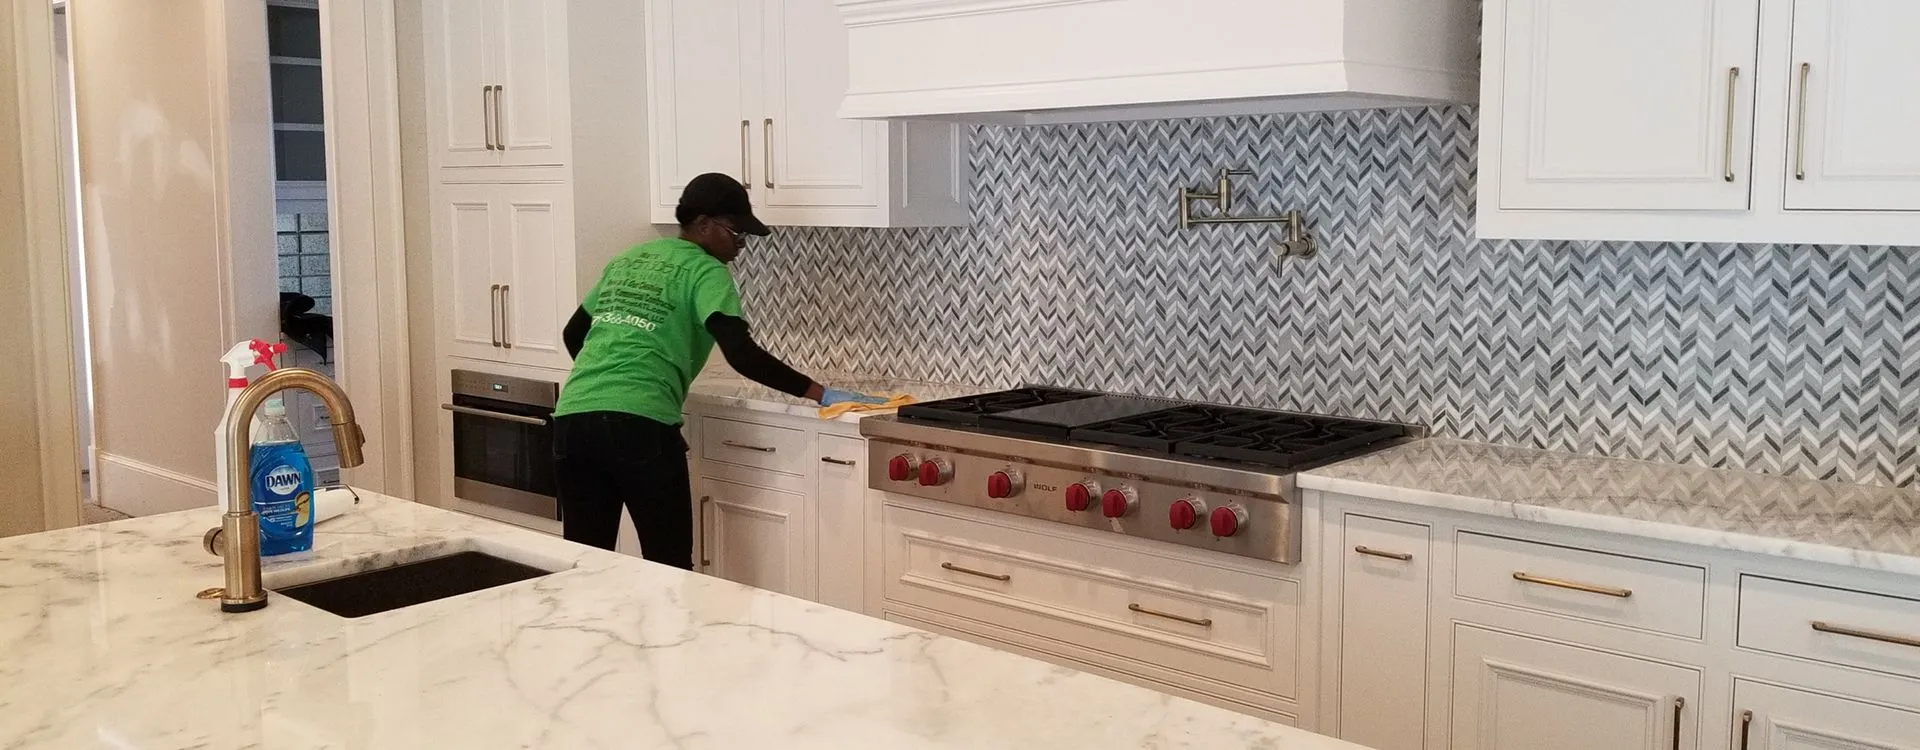 Professional Cleaning Service Atlanta